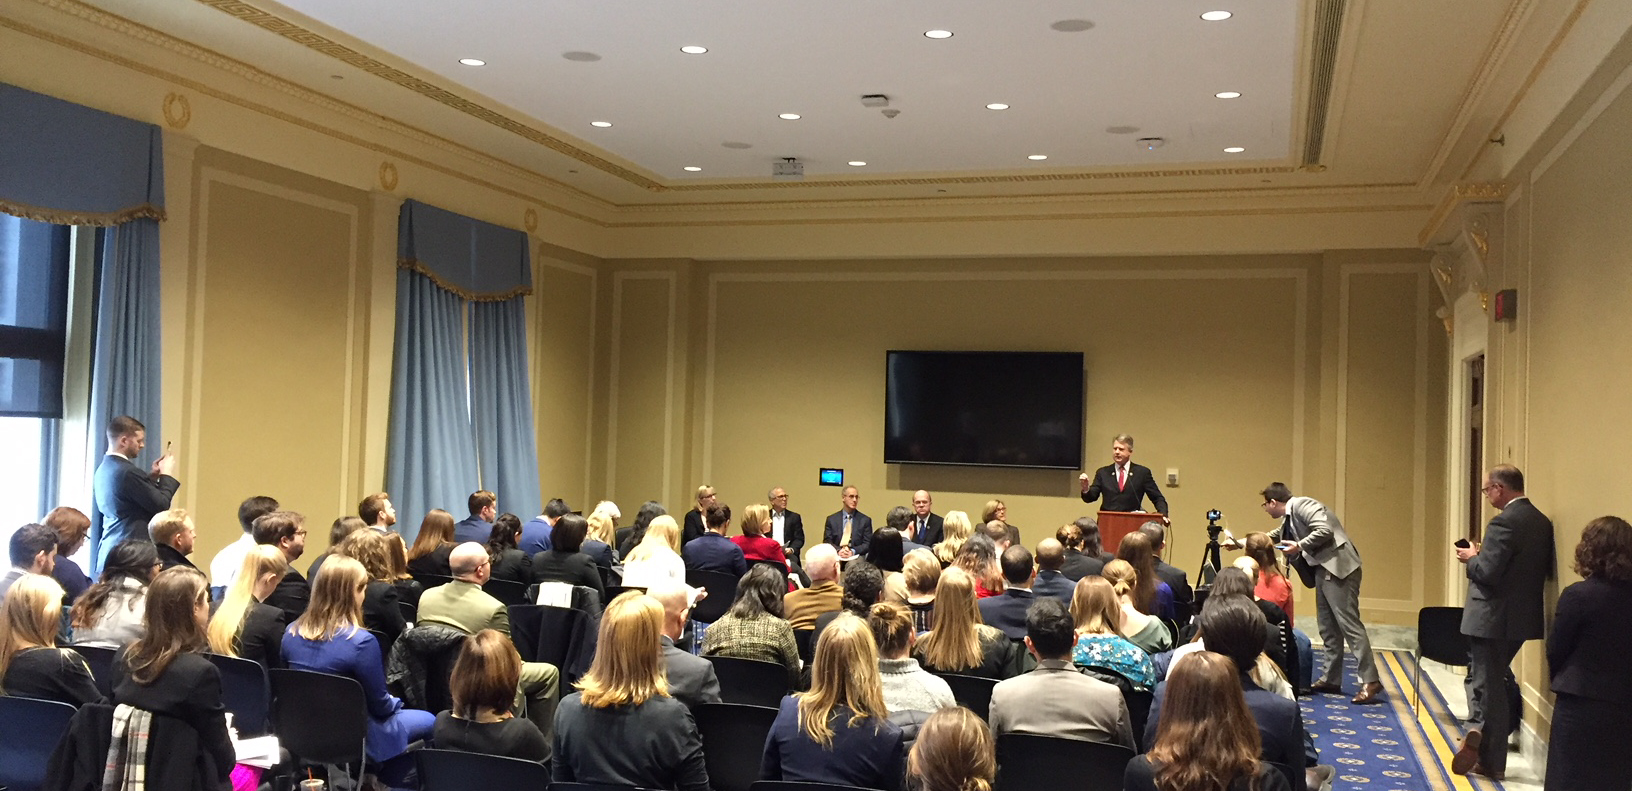 The event in Washington included a briefing and panel discussion about the social and fiscal repercussions of poor nutrition.